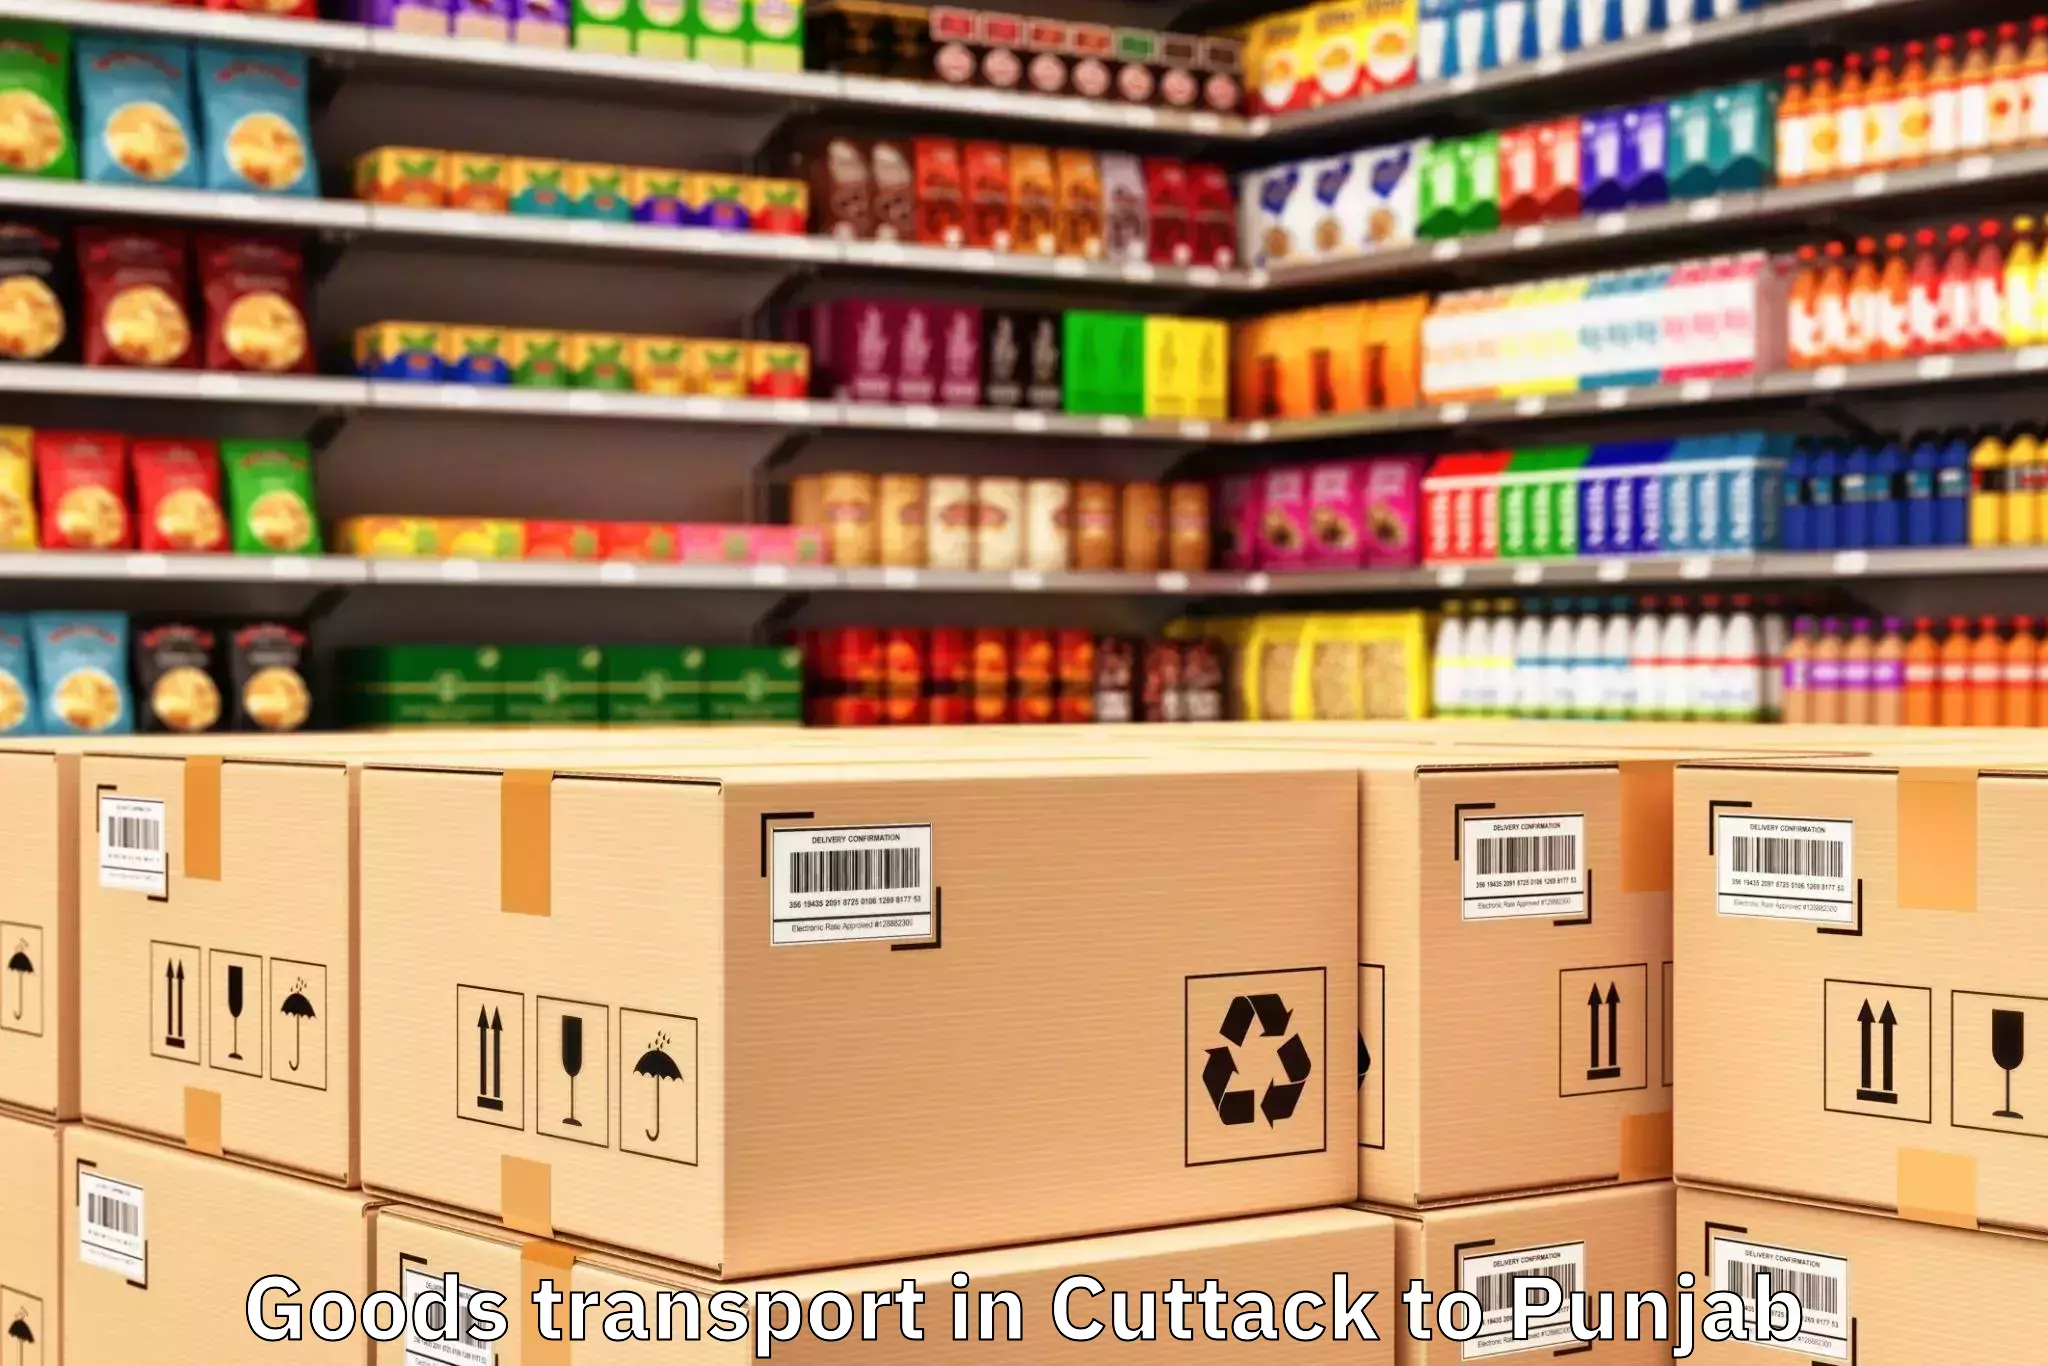 Discover Cuttack to Punjab Goods Transport